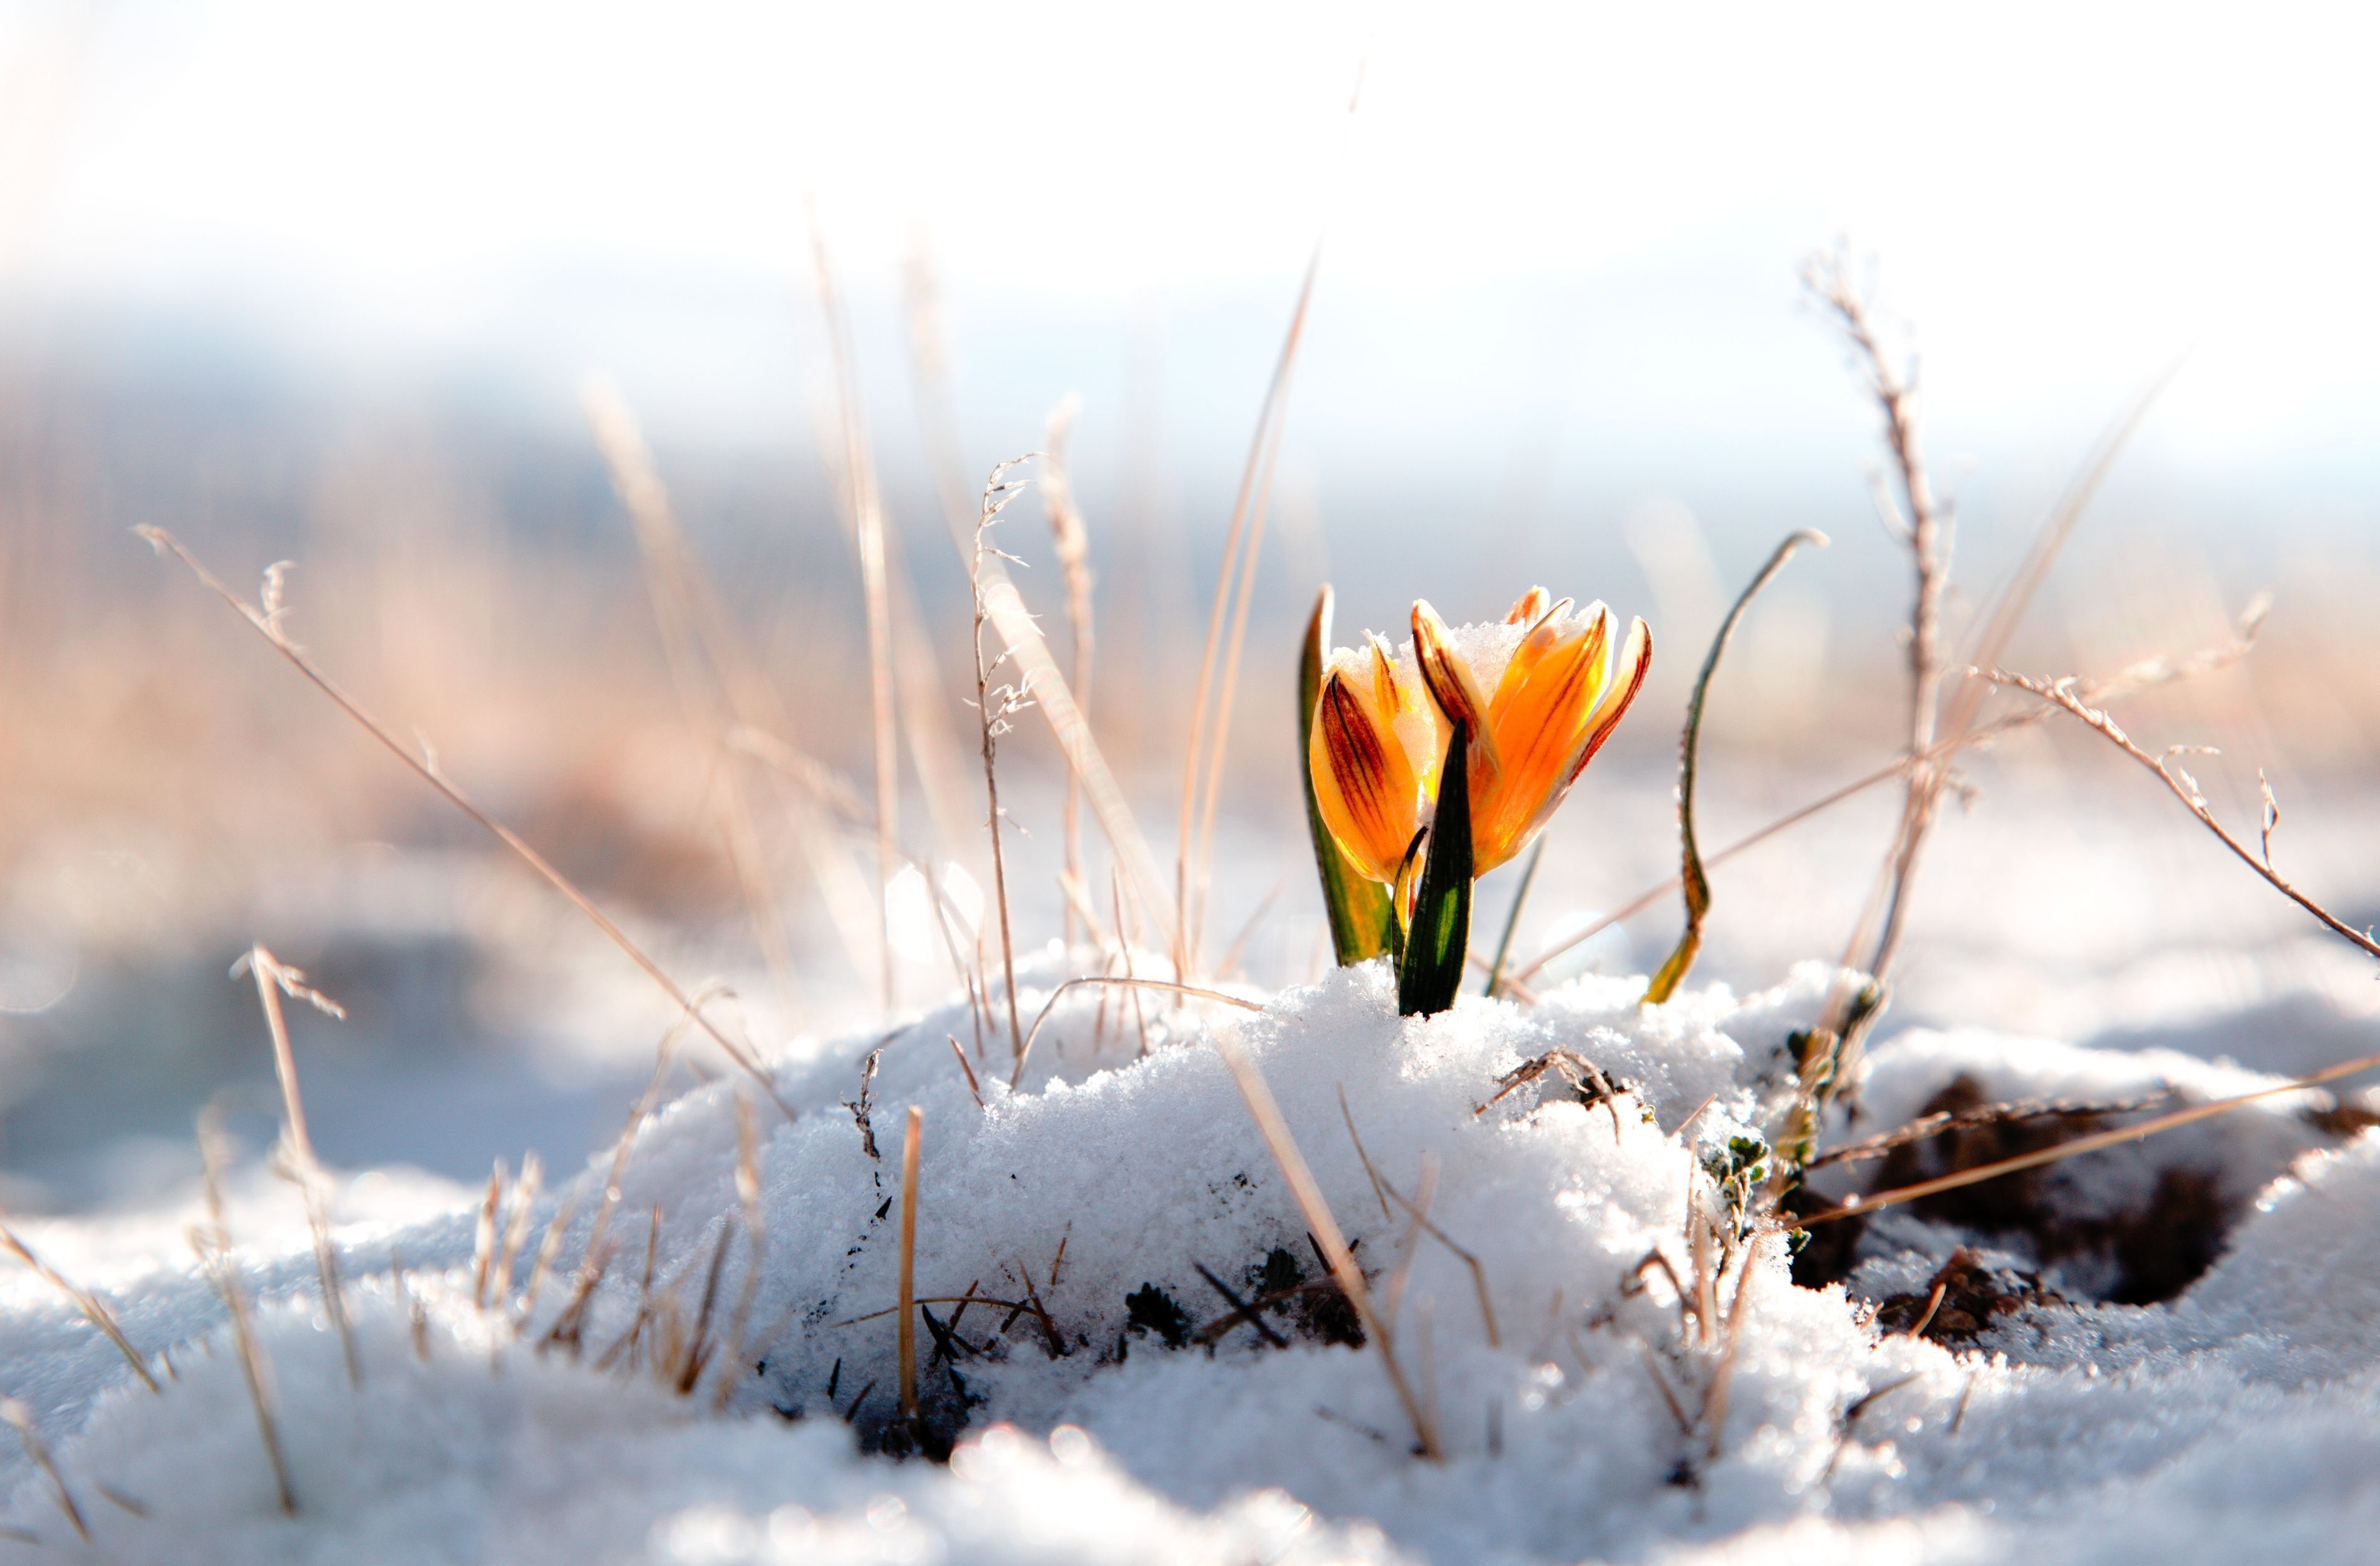 Flowers on melted snow wallpapers and images - wallpapers, pictures, photos